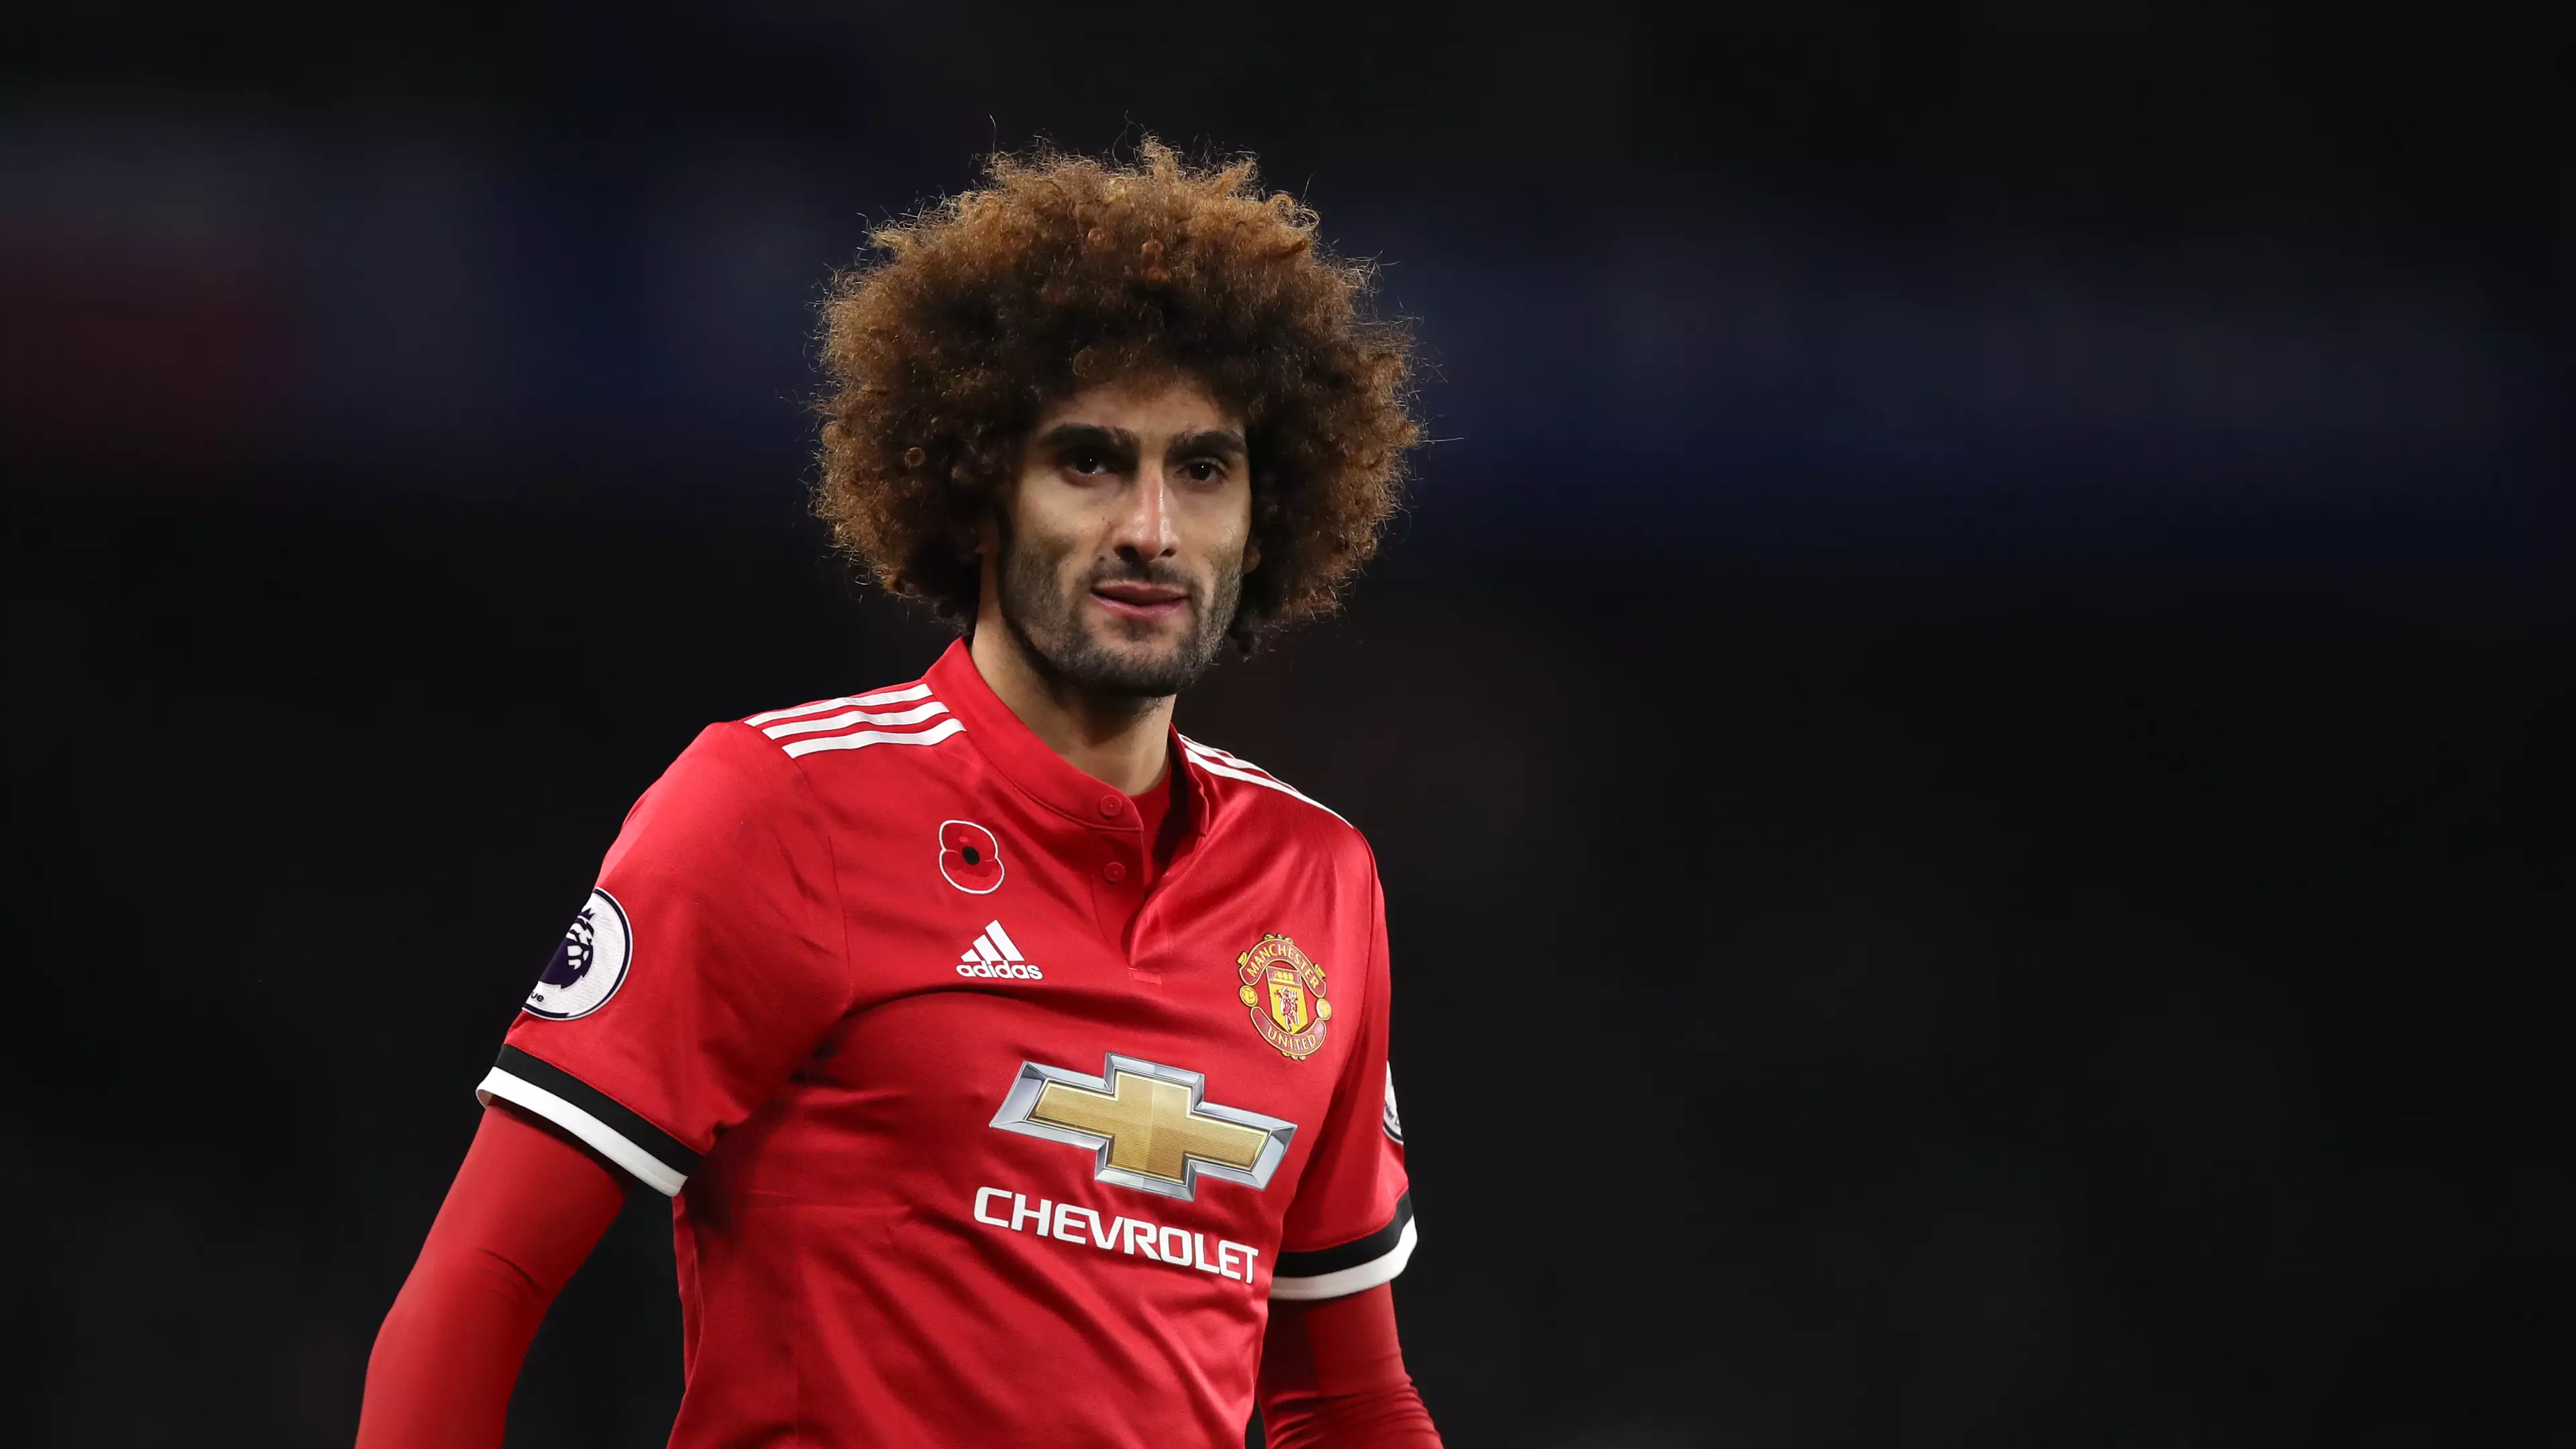 Club Admit They Still Have Interest In Signing Marouane Fellaini